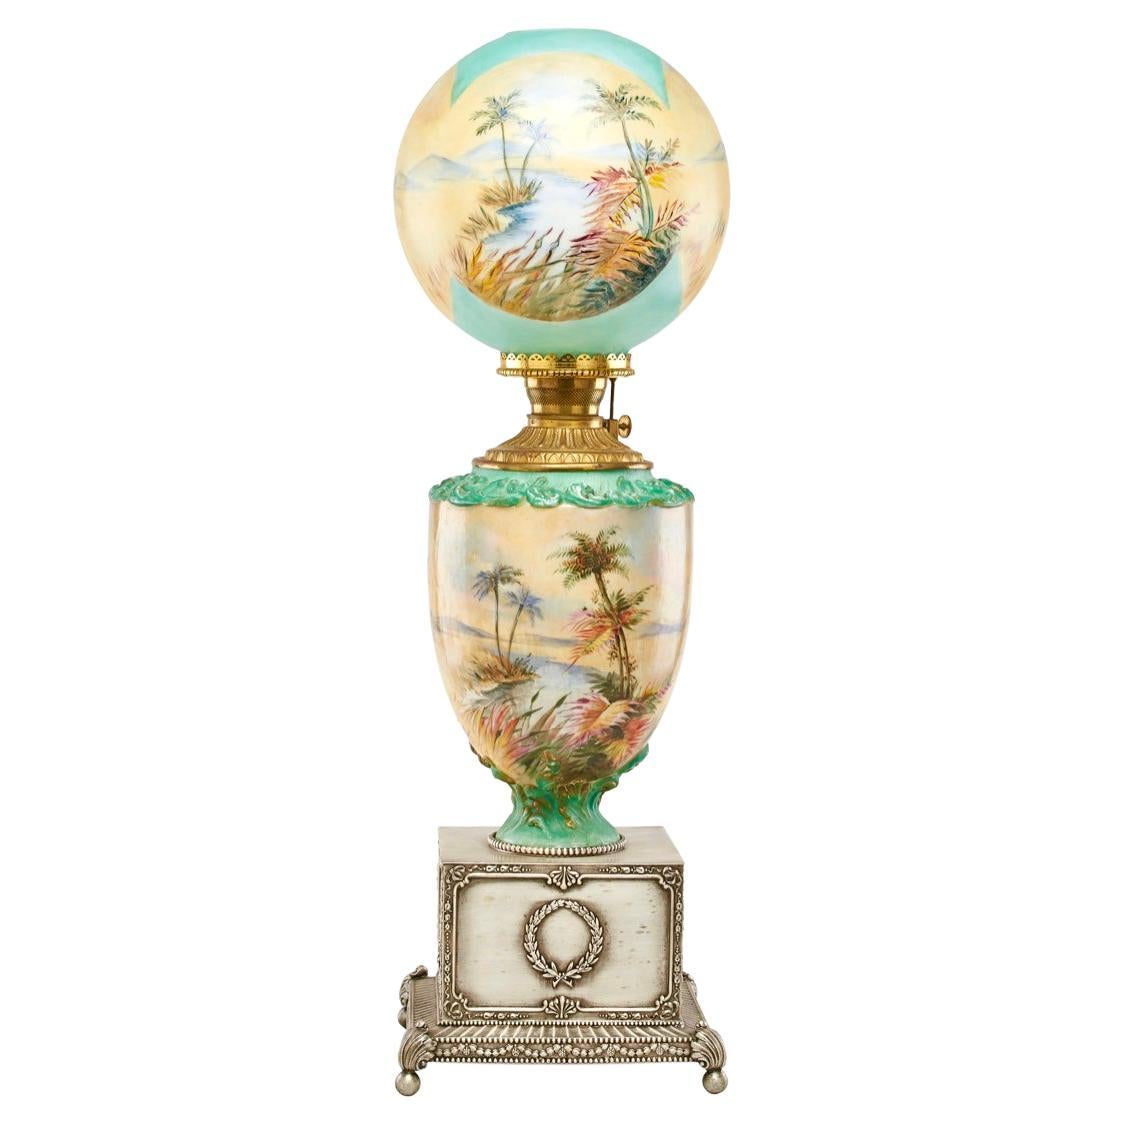 Pairpoint Monumental Hand-Painted Orientalist Oil Lamp, Pyramids, Palms c 1905